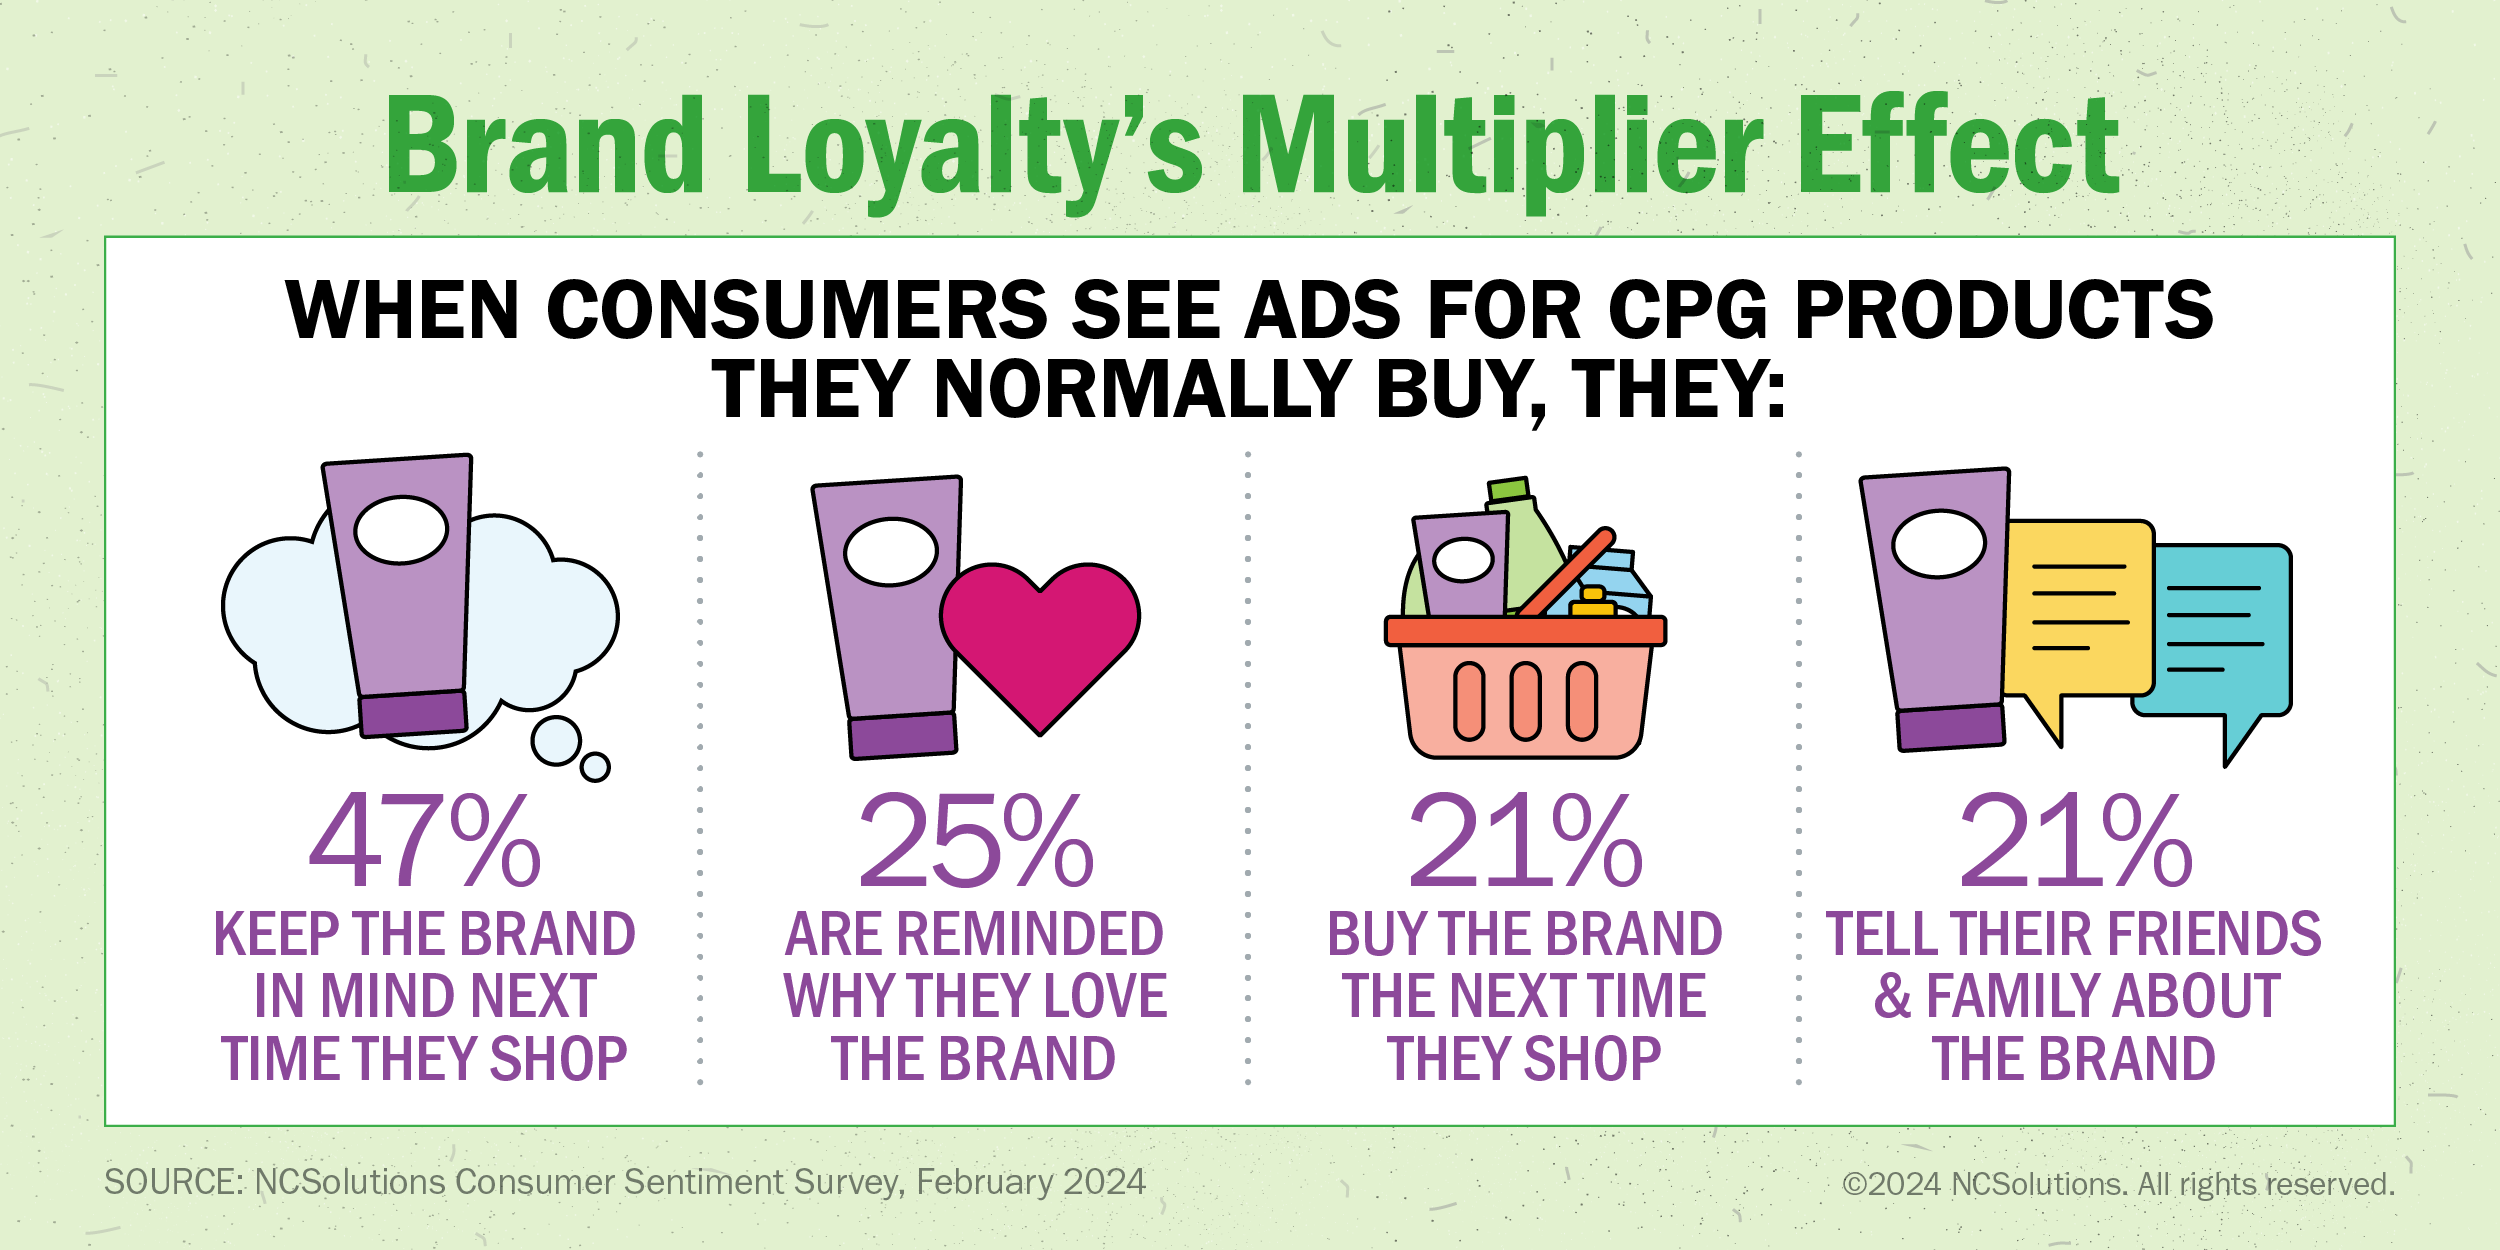 47% keep the brand in mind next time they sho when consumers see ads for CPG products. 